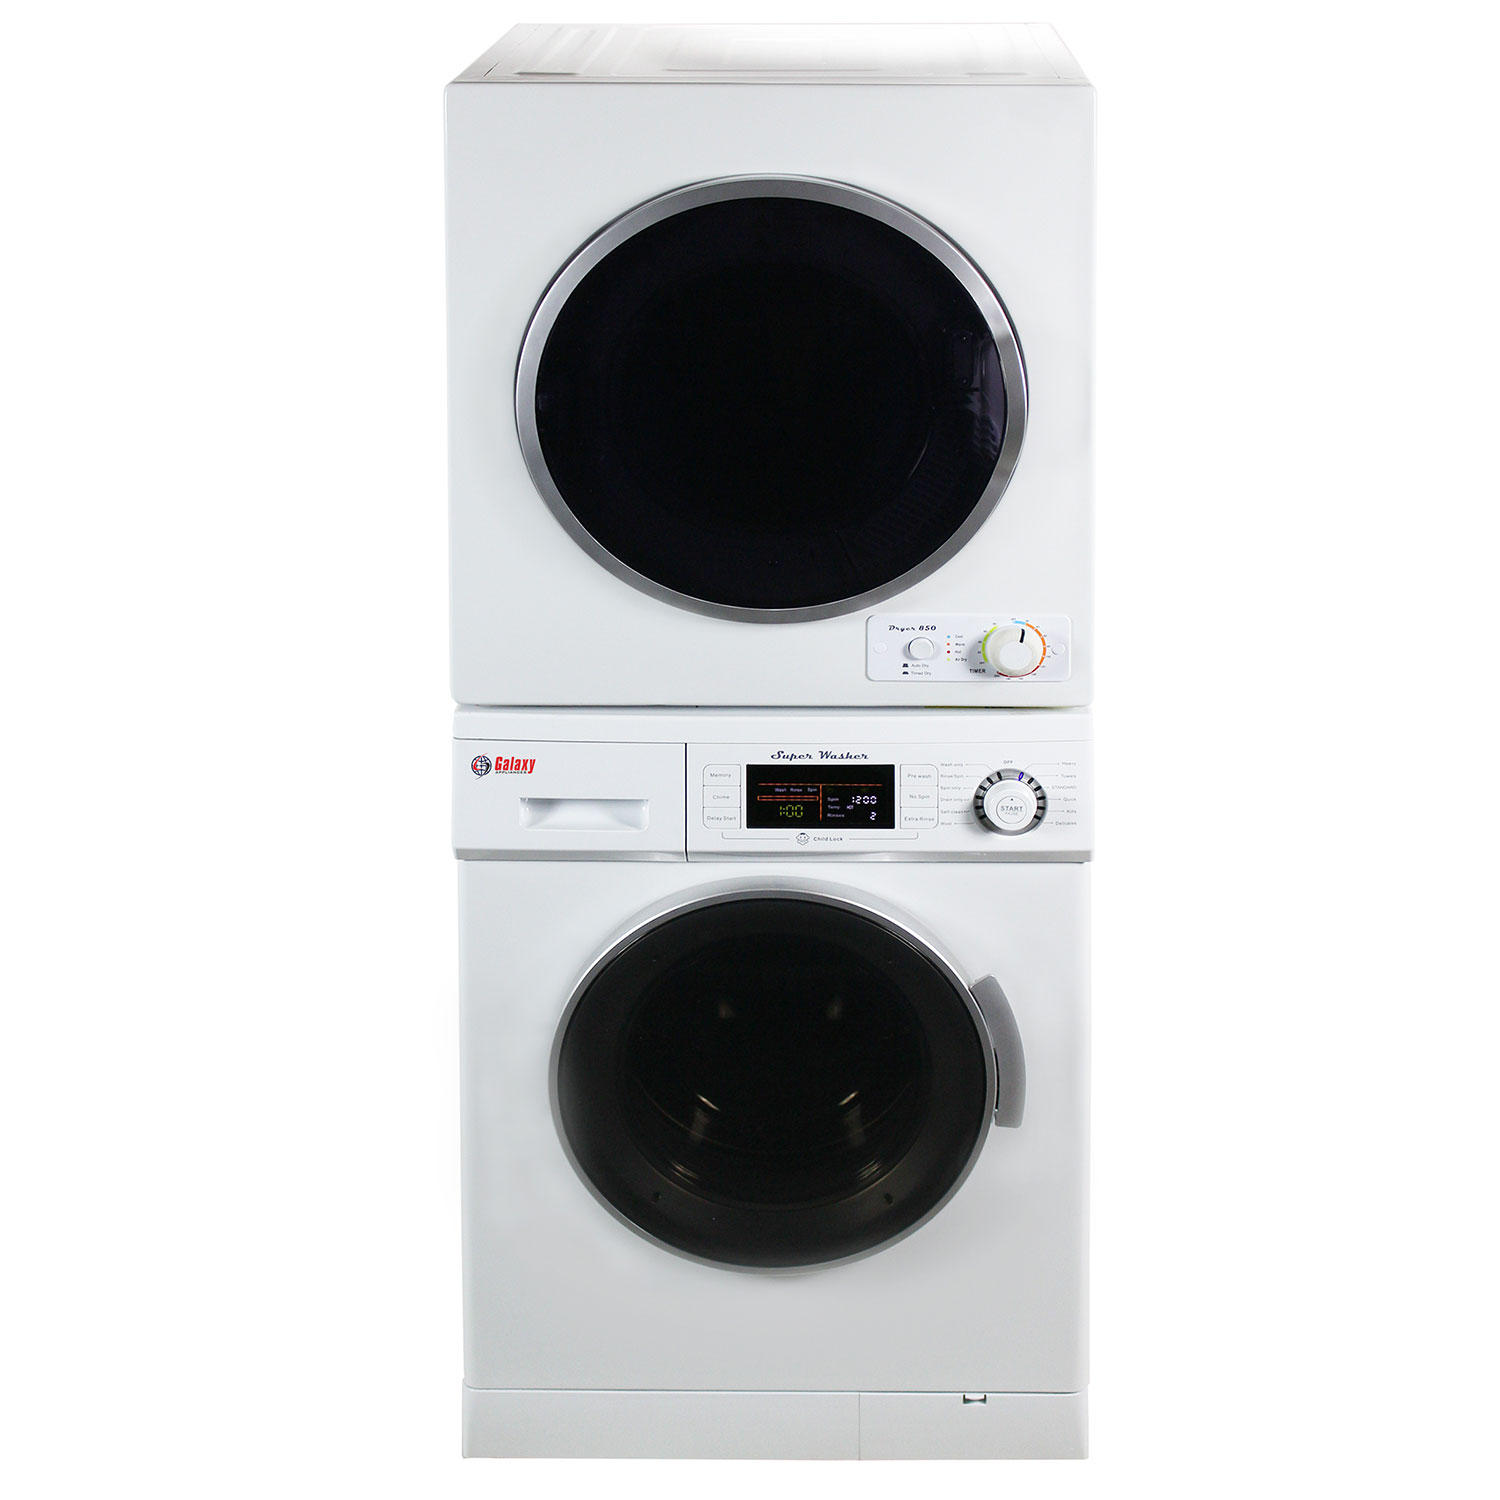 UPC 747037168753 product image for GW 824 & GD 850 - Stackable set of 1.6 cu. ft Compact Super Washer & 3.5 cu. ft  | upcitemdb.com